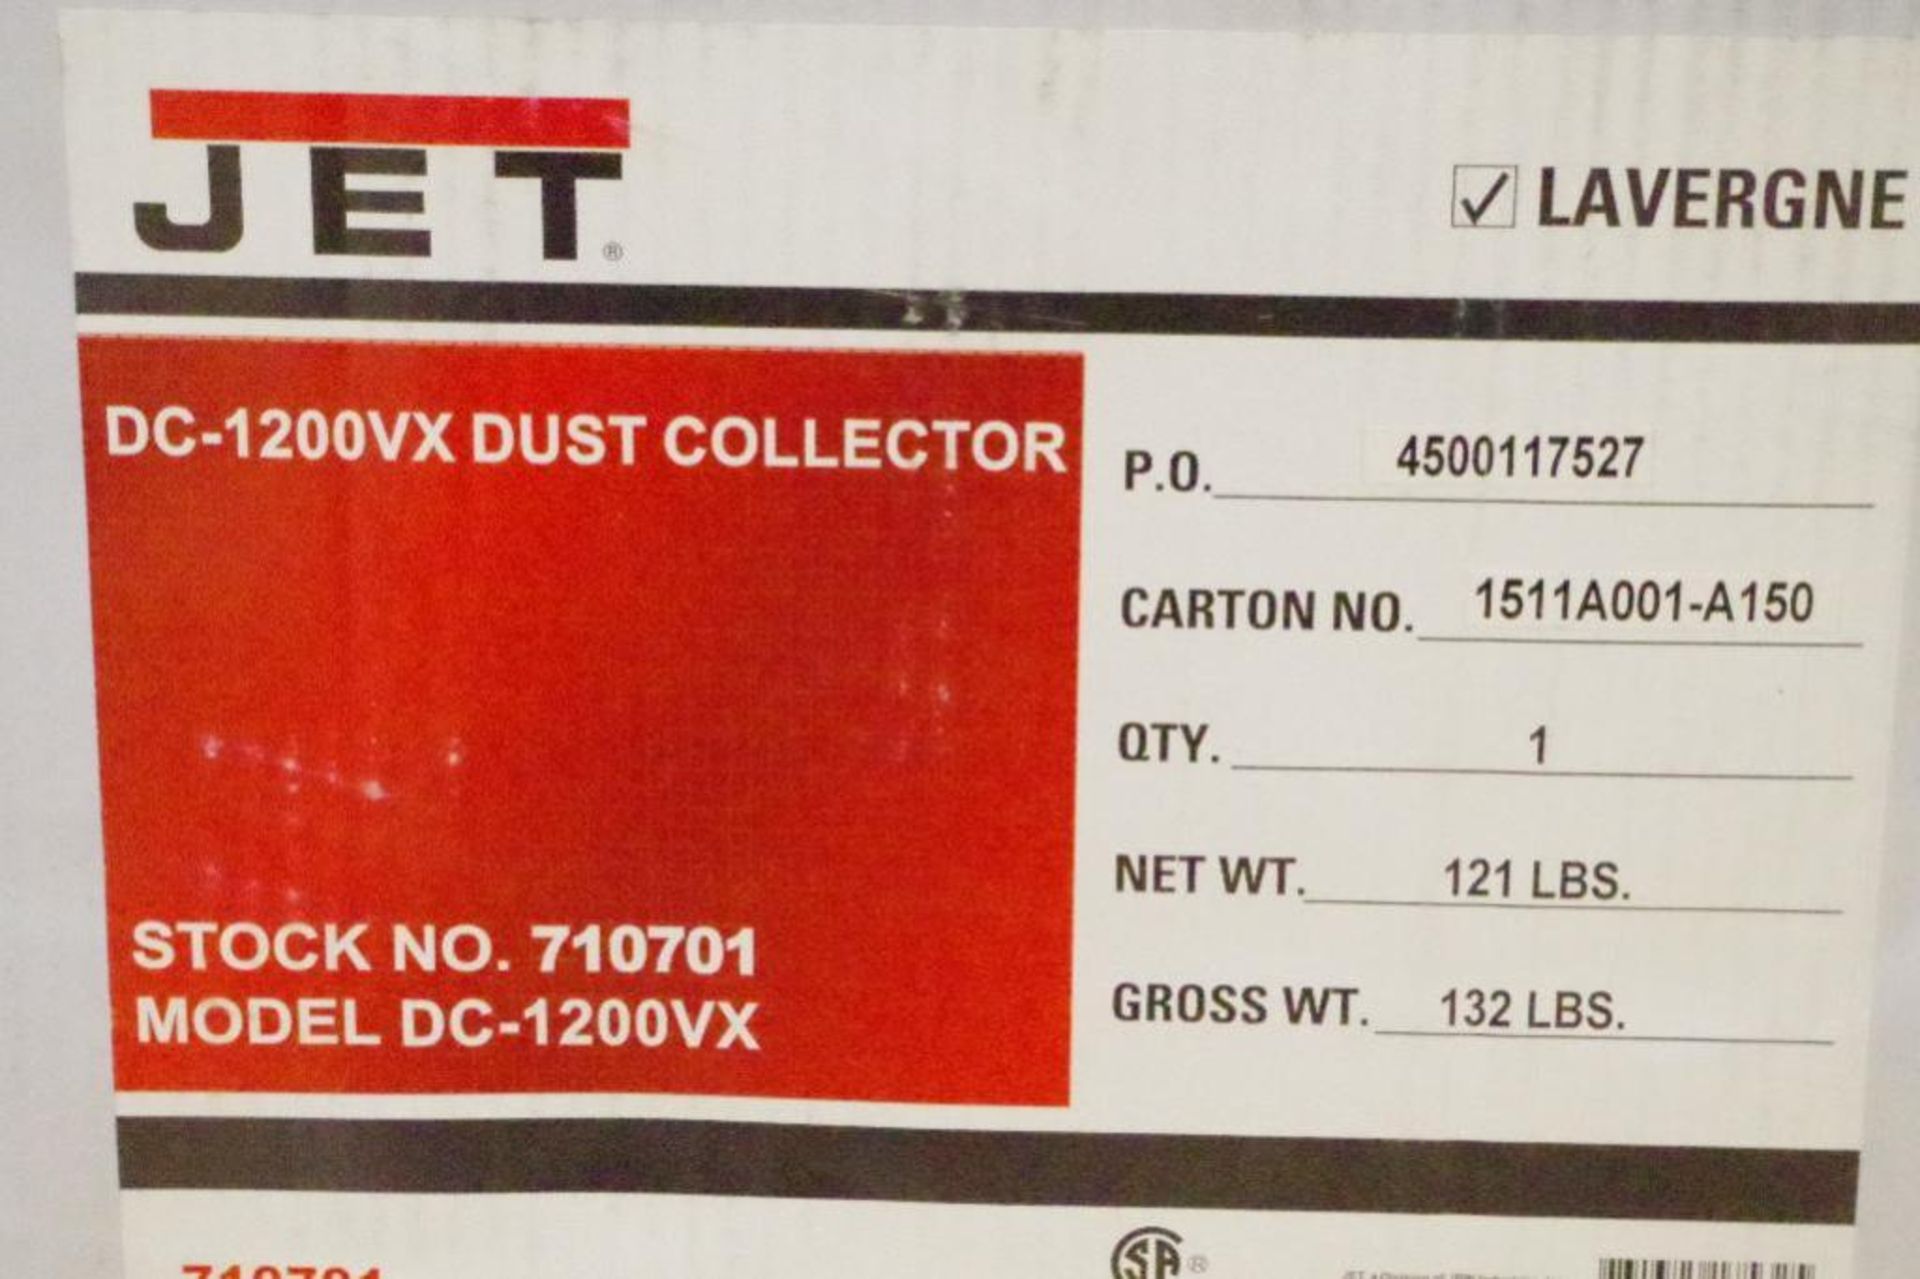 NEW JET Dust Collector M/N DC-1200VX w/ JET 30-Micron Bag Filter Kit, M/N DC-1100B - Image 4 of 6